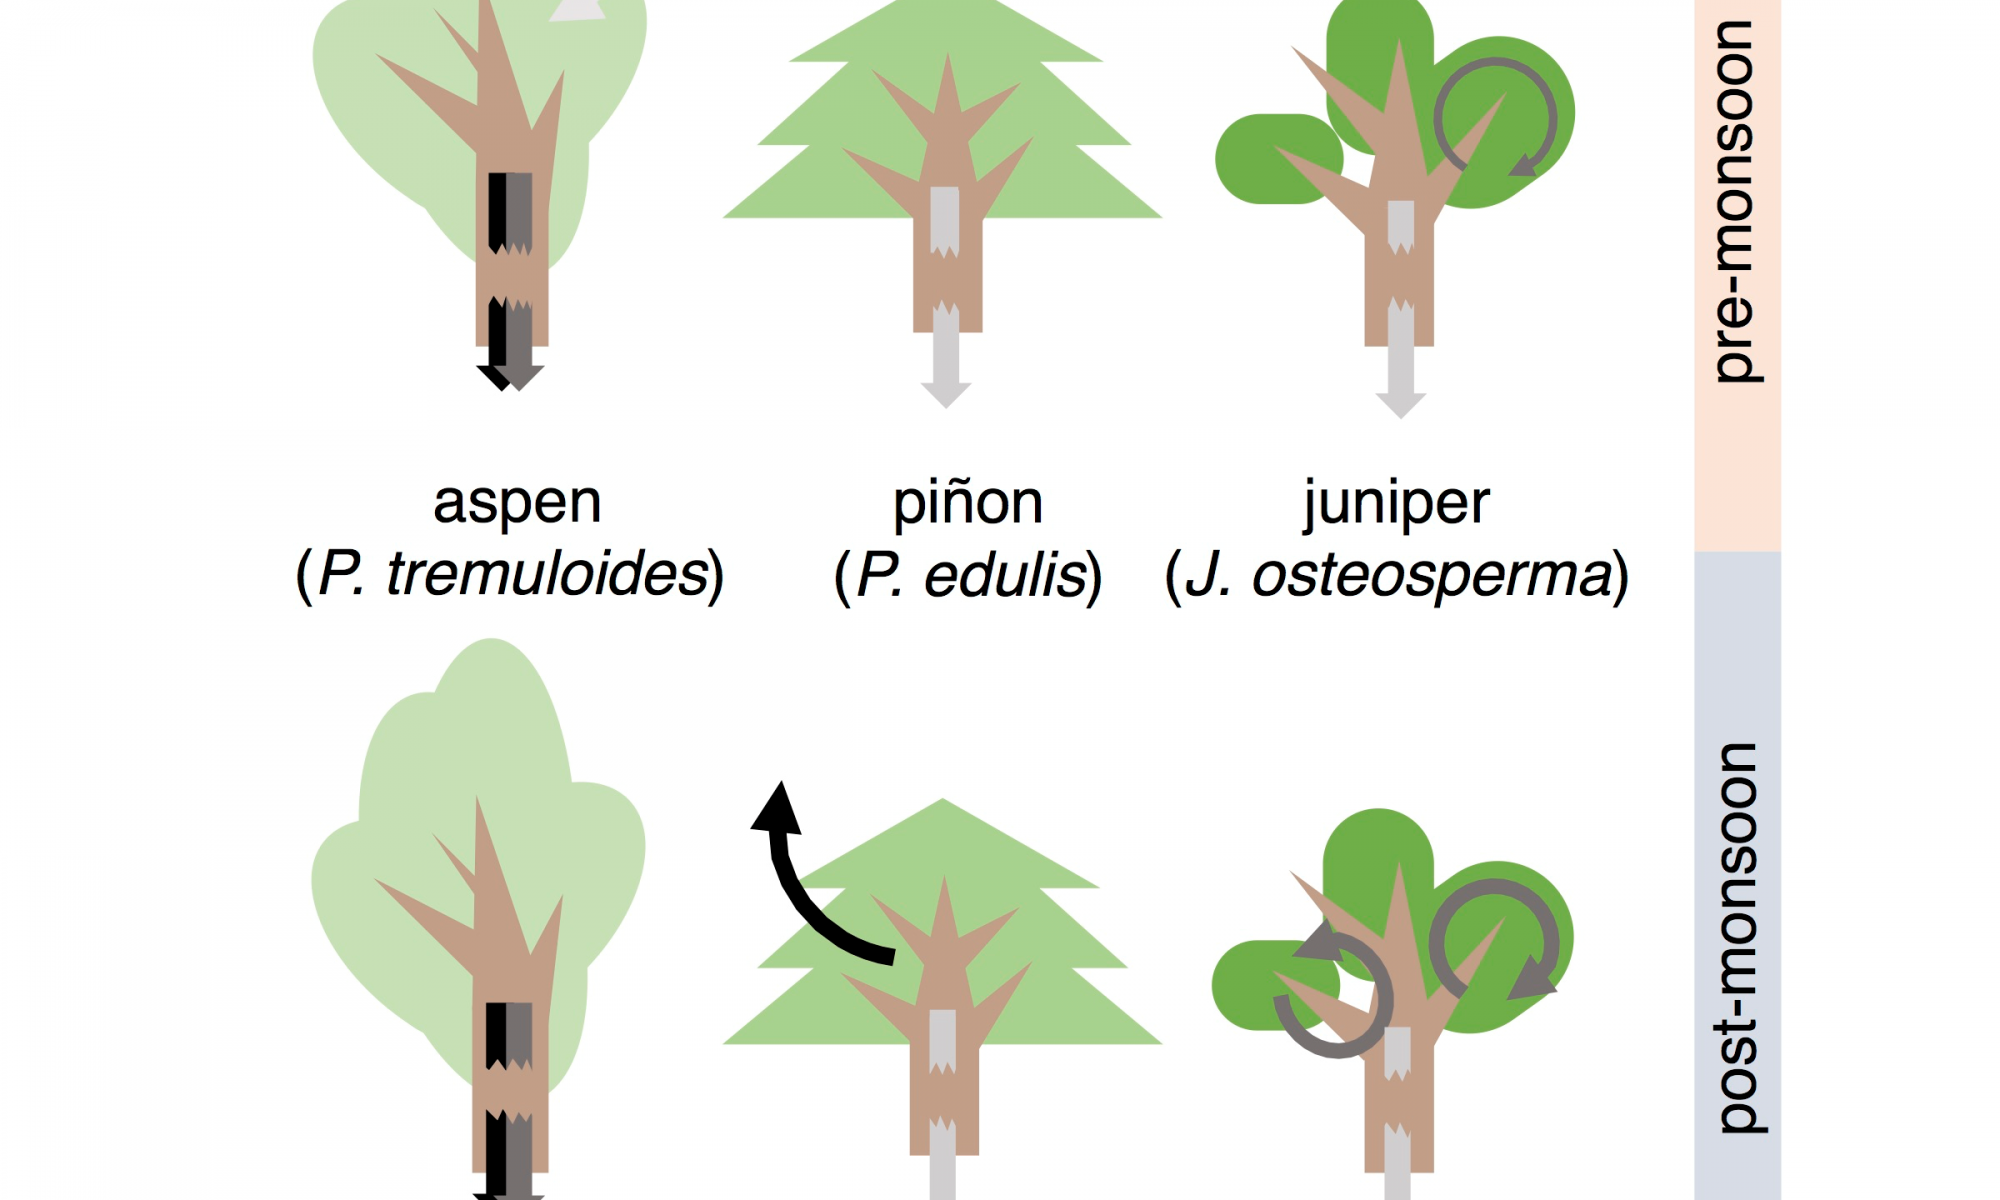 Cartoon showing three different tree species and their responses to precipitation